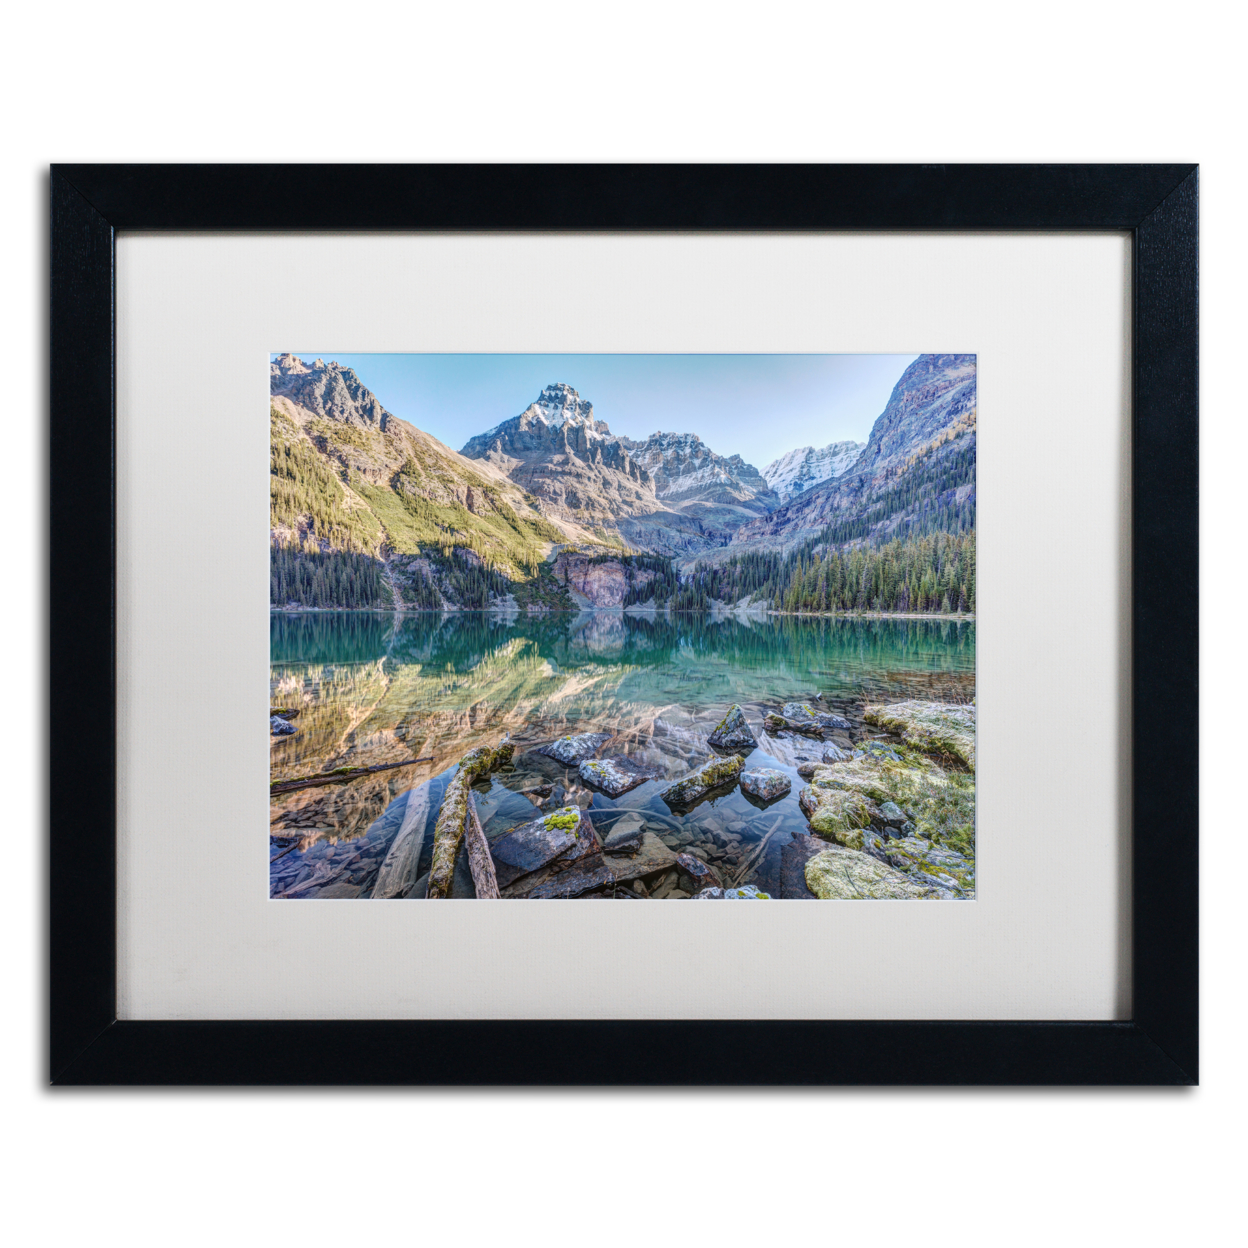 Pierre Leclerc 'Lake O'Hara Mountain Haven' Black Wooden Framed Art 18 X 22 Inches